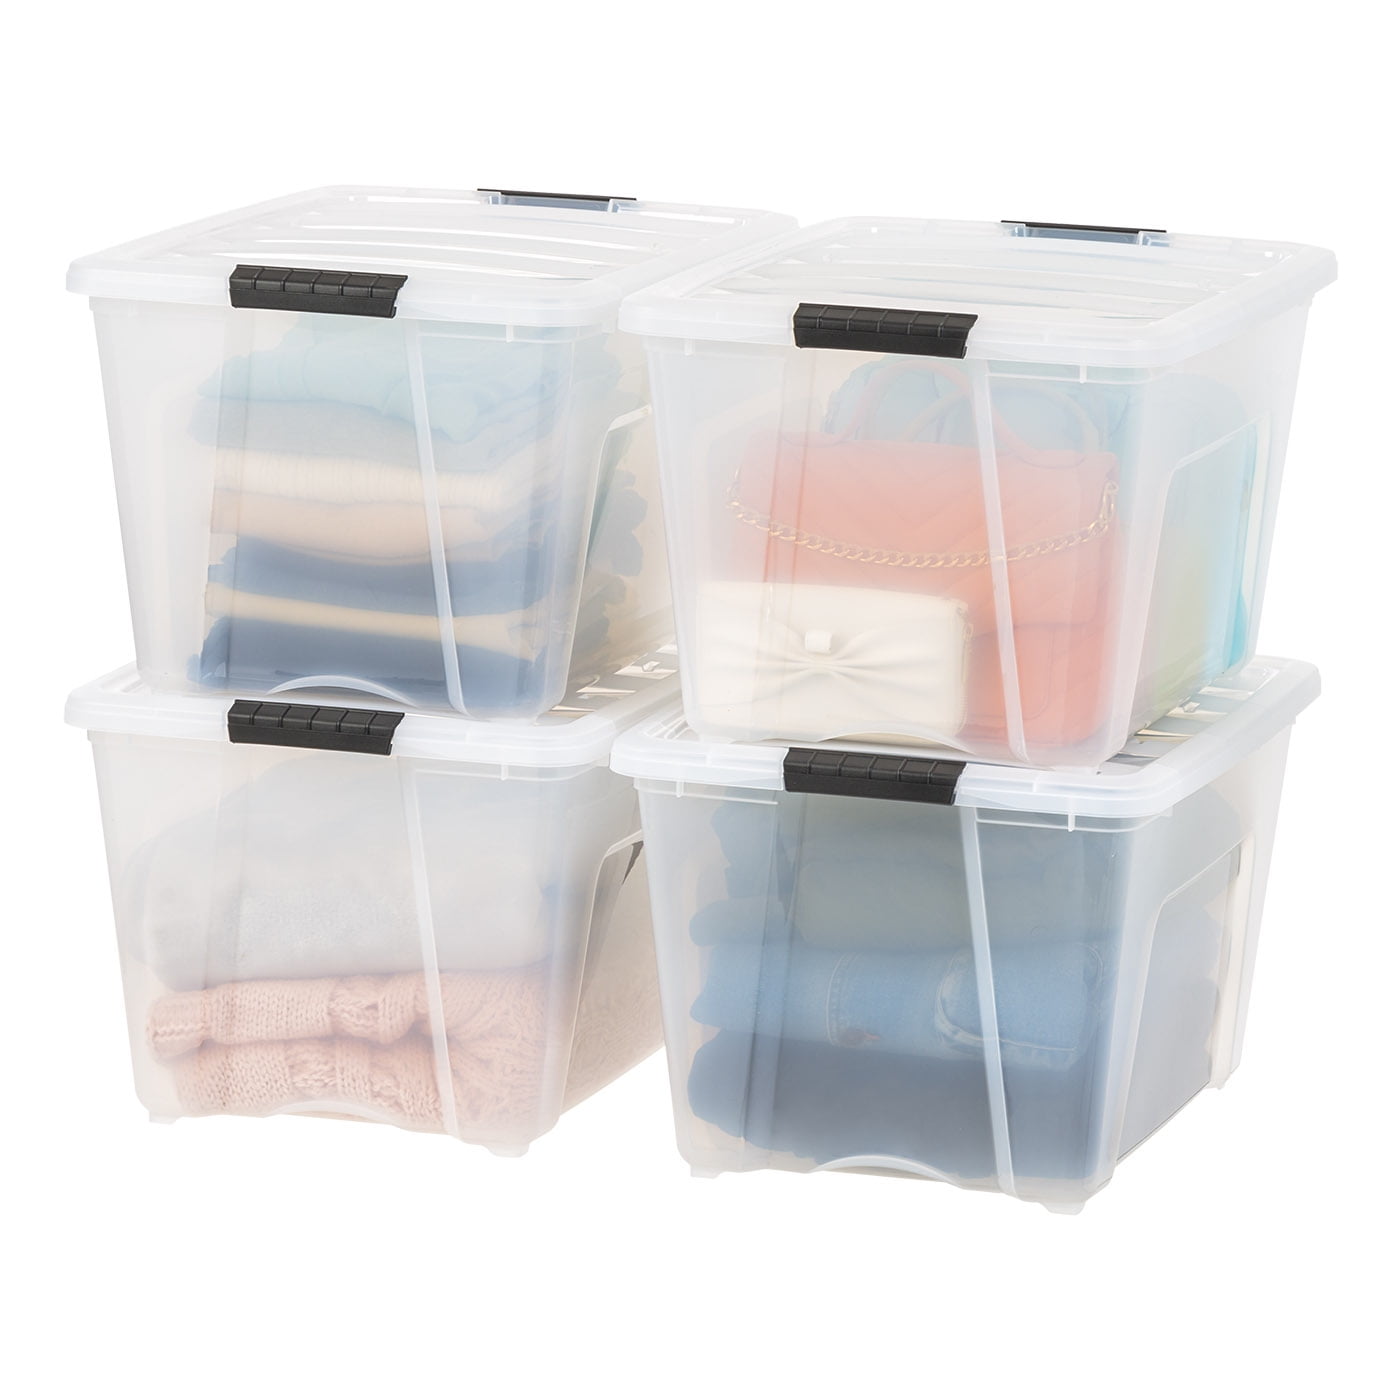 IRIS 3-Pack Stack and Pull Small 18-Gallons (72-Quart) Gray Tote with  Latching Lid in the Plastic Storage Containers department at